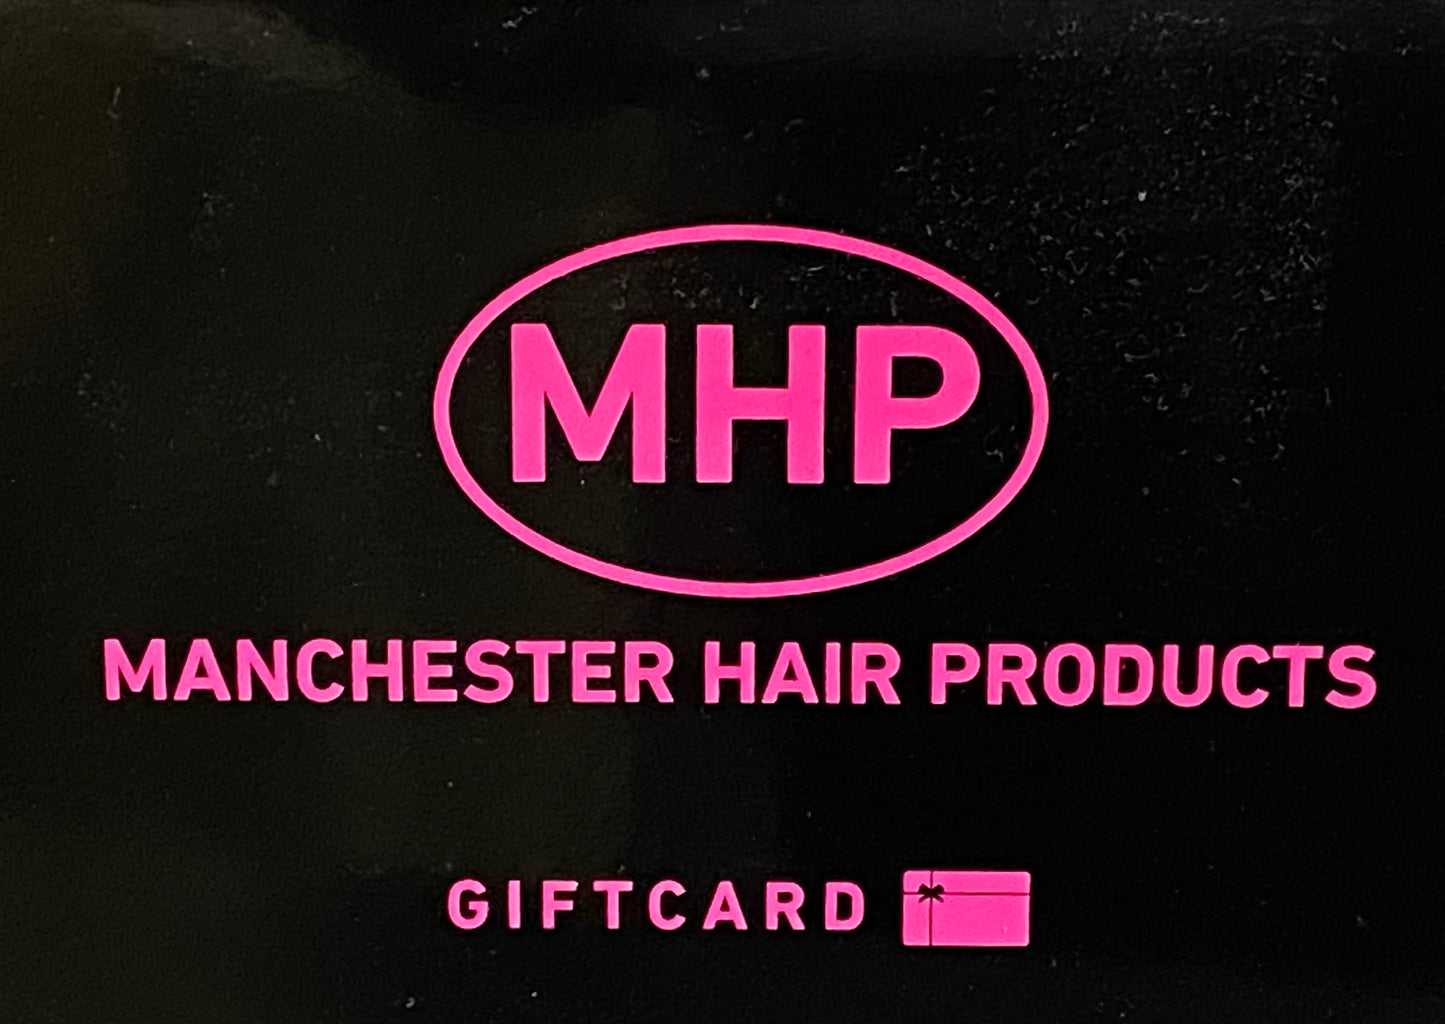 MANCHESTER HAIR PRODUCTS GIFT CARD